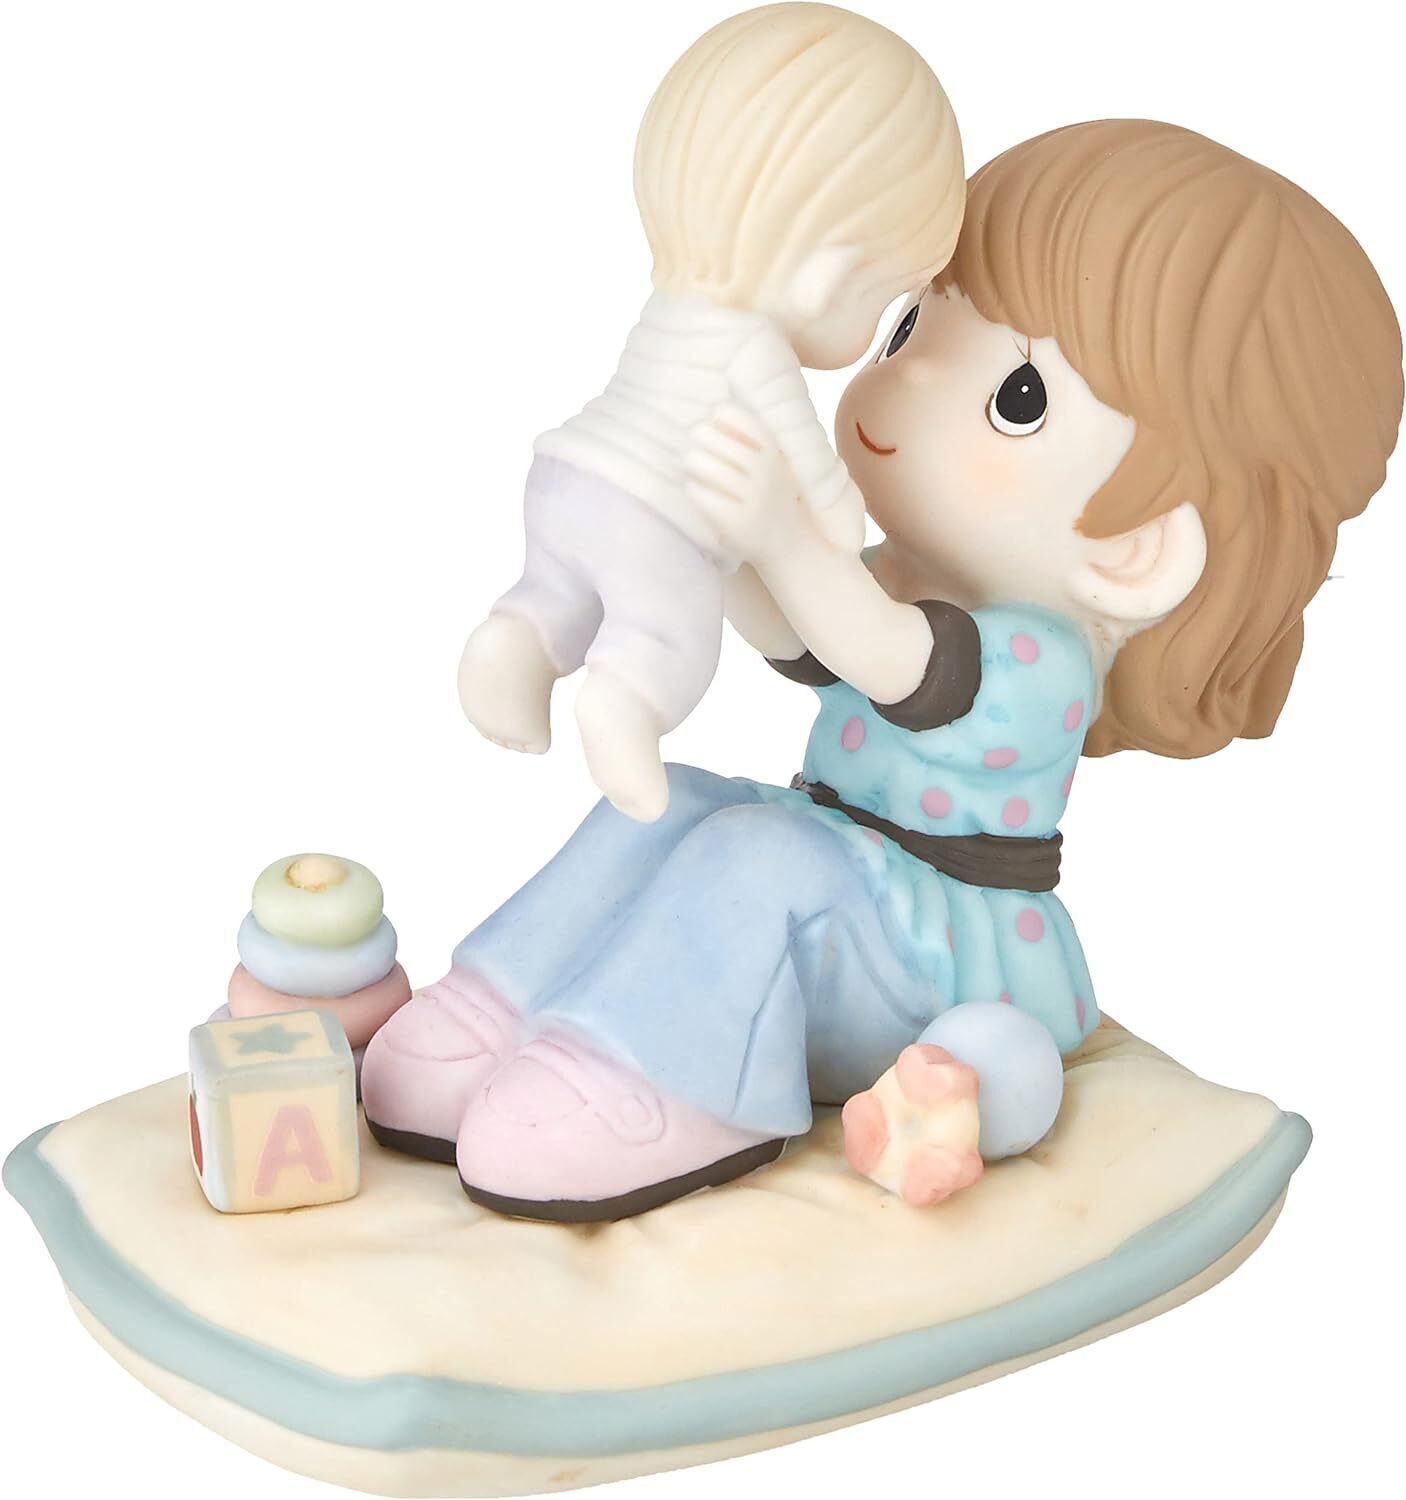 Gift For Mother's Day-A Love As High As The Sky, Bisque Porcelain Figurine